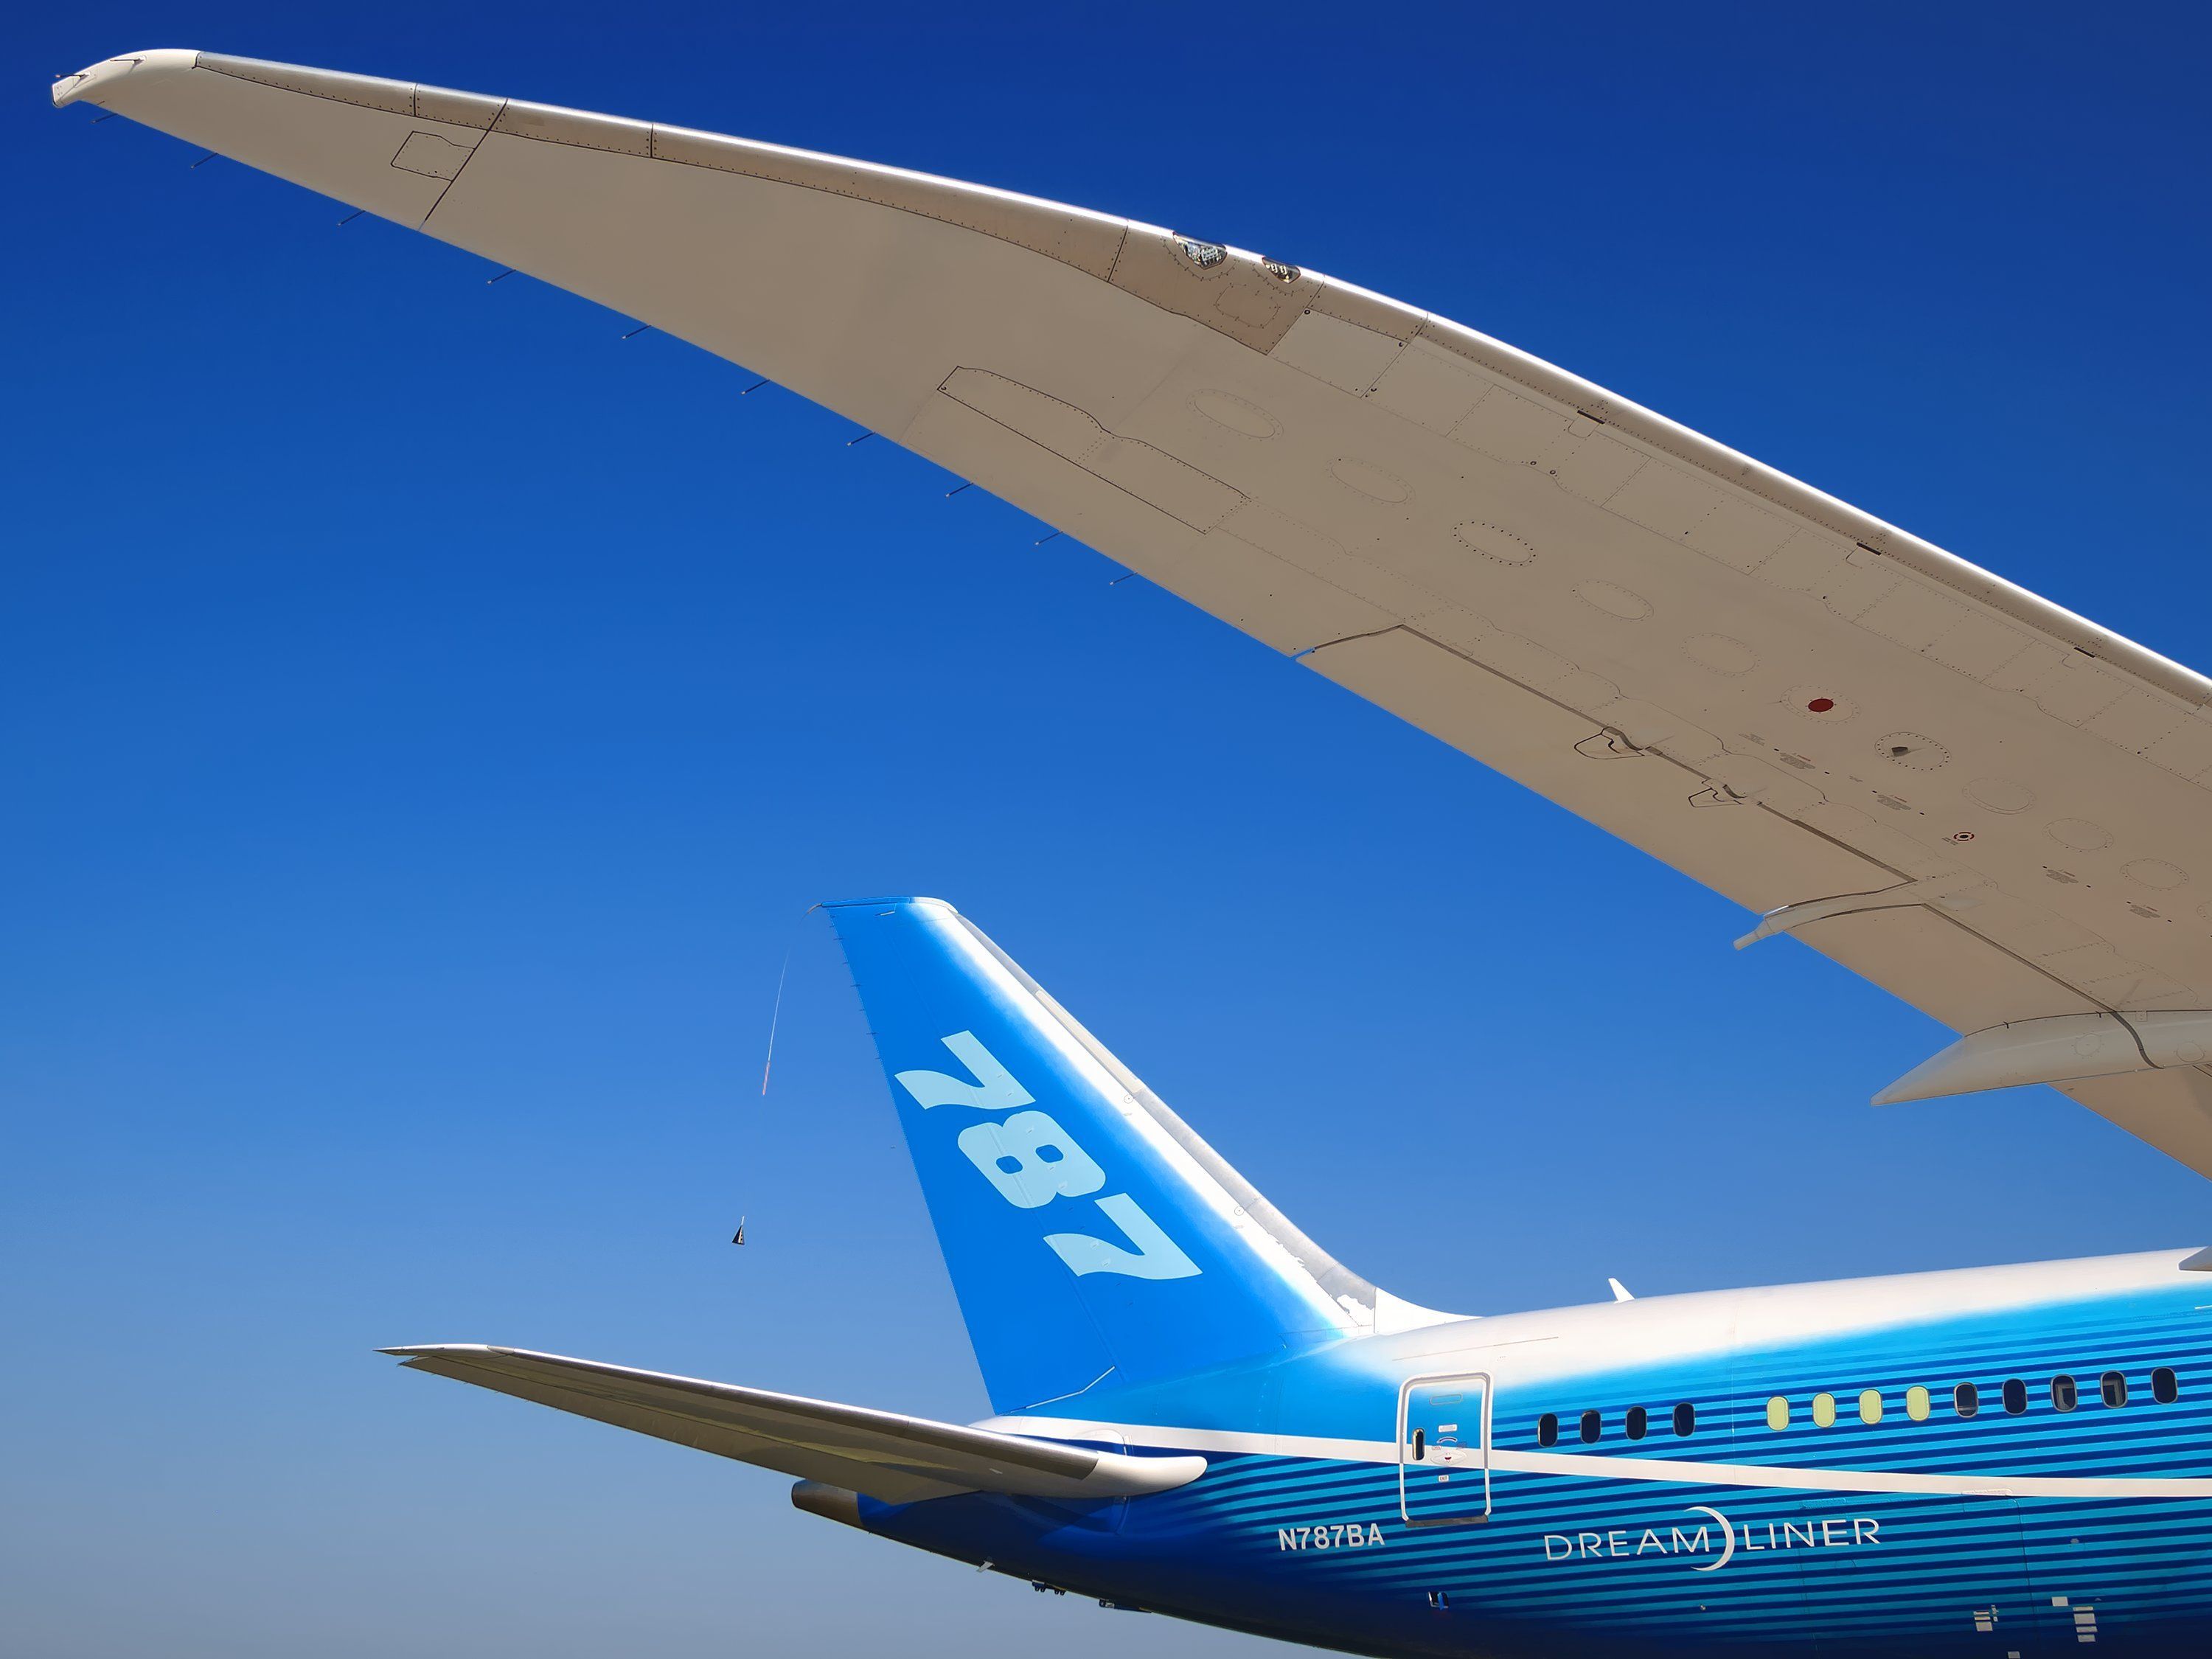 MOSCOW REGION, RUSSIA - AUGUST, 2011: Boeing Company Boeing 787 Dreamliner passenger jet airplane in dreamliner color scheme with winglets close up, 787 markings on fin wide panoramic detail view